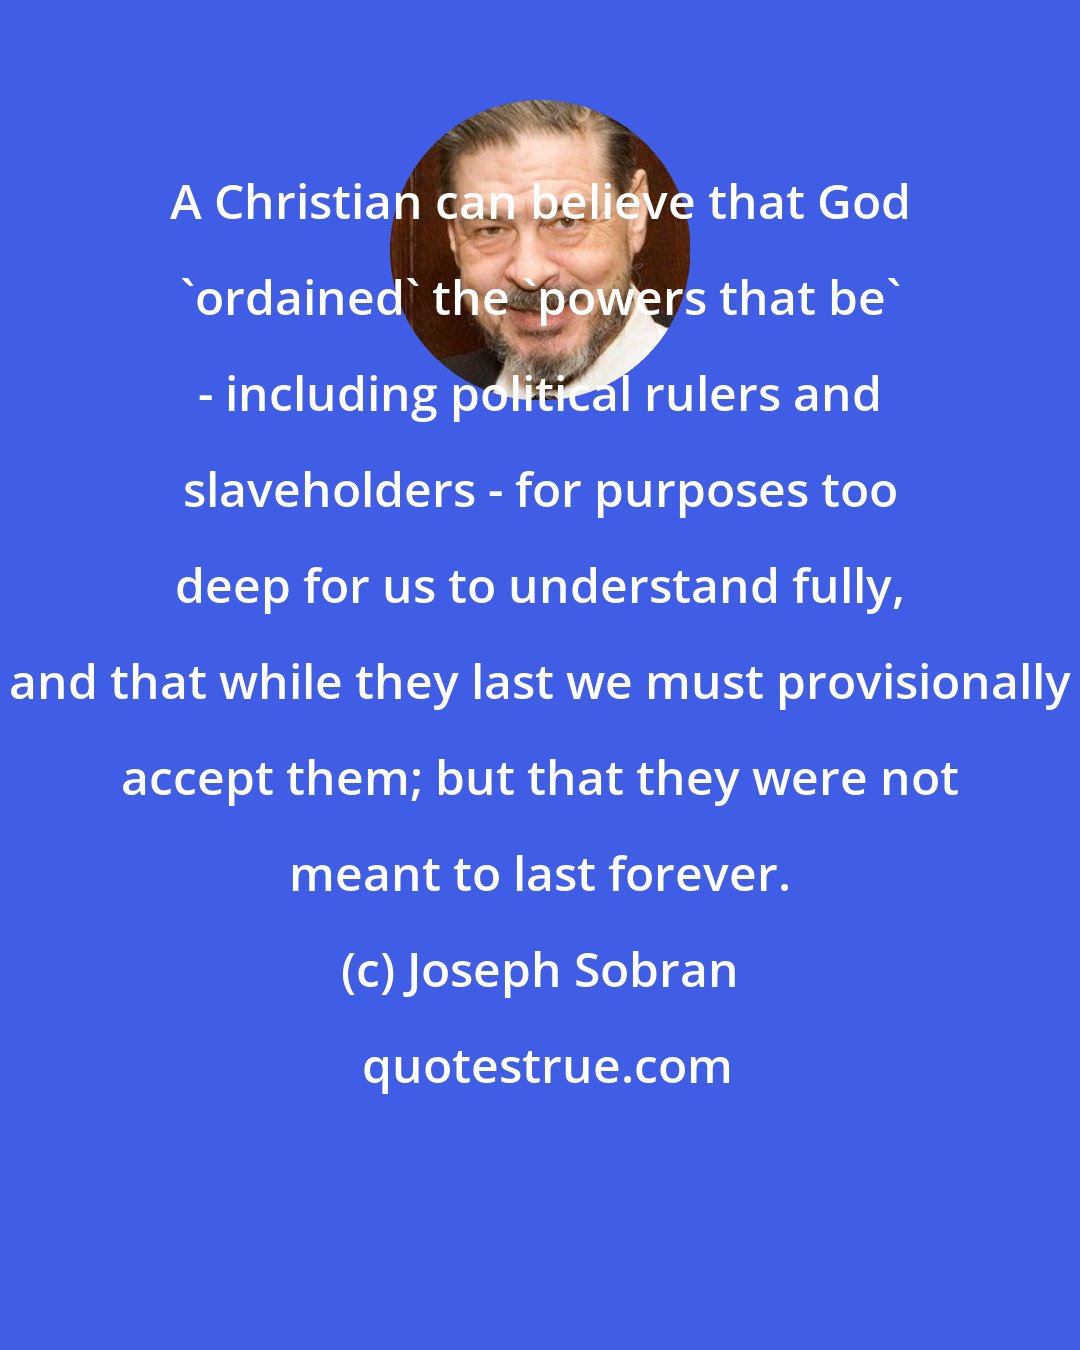 Joseph Sobran: A Christian can believe that God 'ordained' the 'powers that be' - including political rulers and slaveholders - for purposes too deep for us to understand fully, and that while they last we must provisionally accept them; but that they were not meant to last forever.